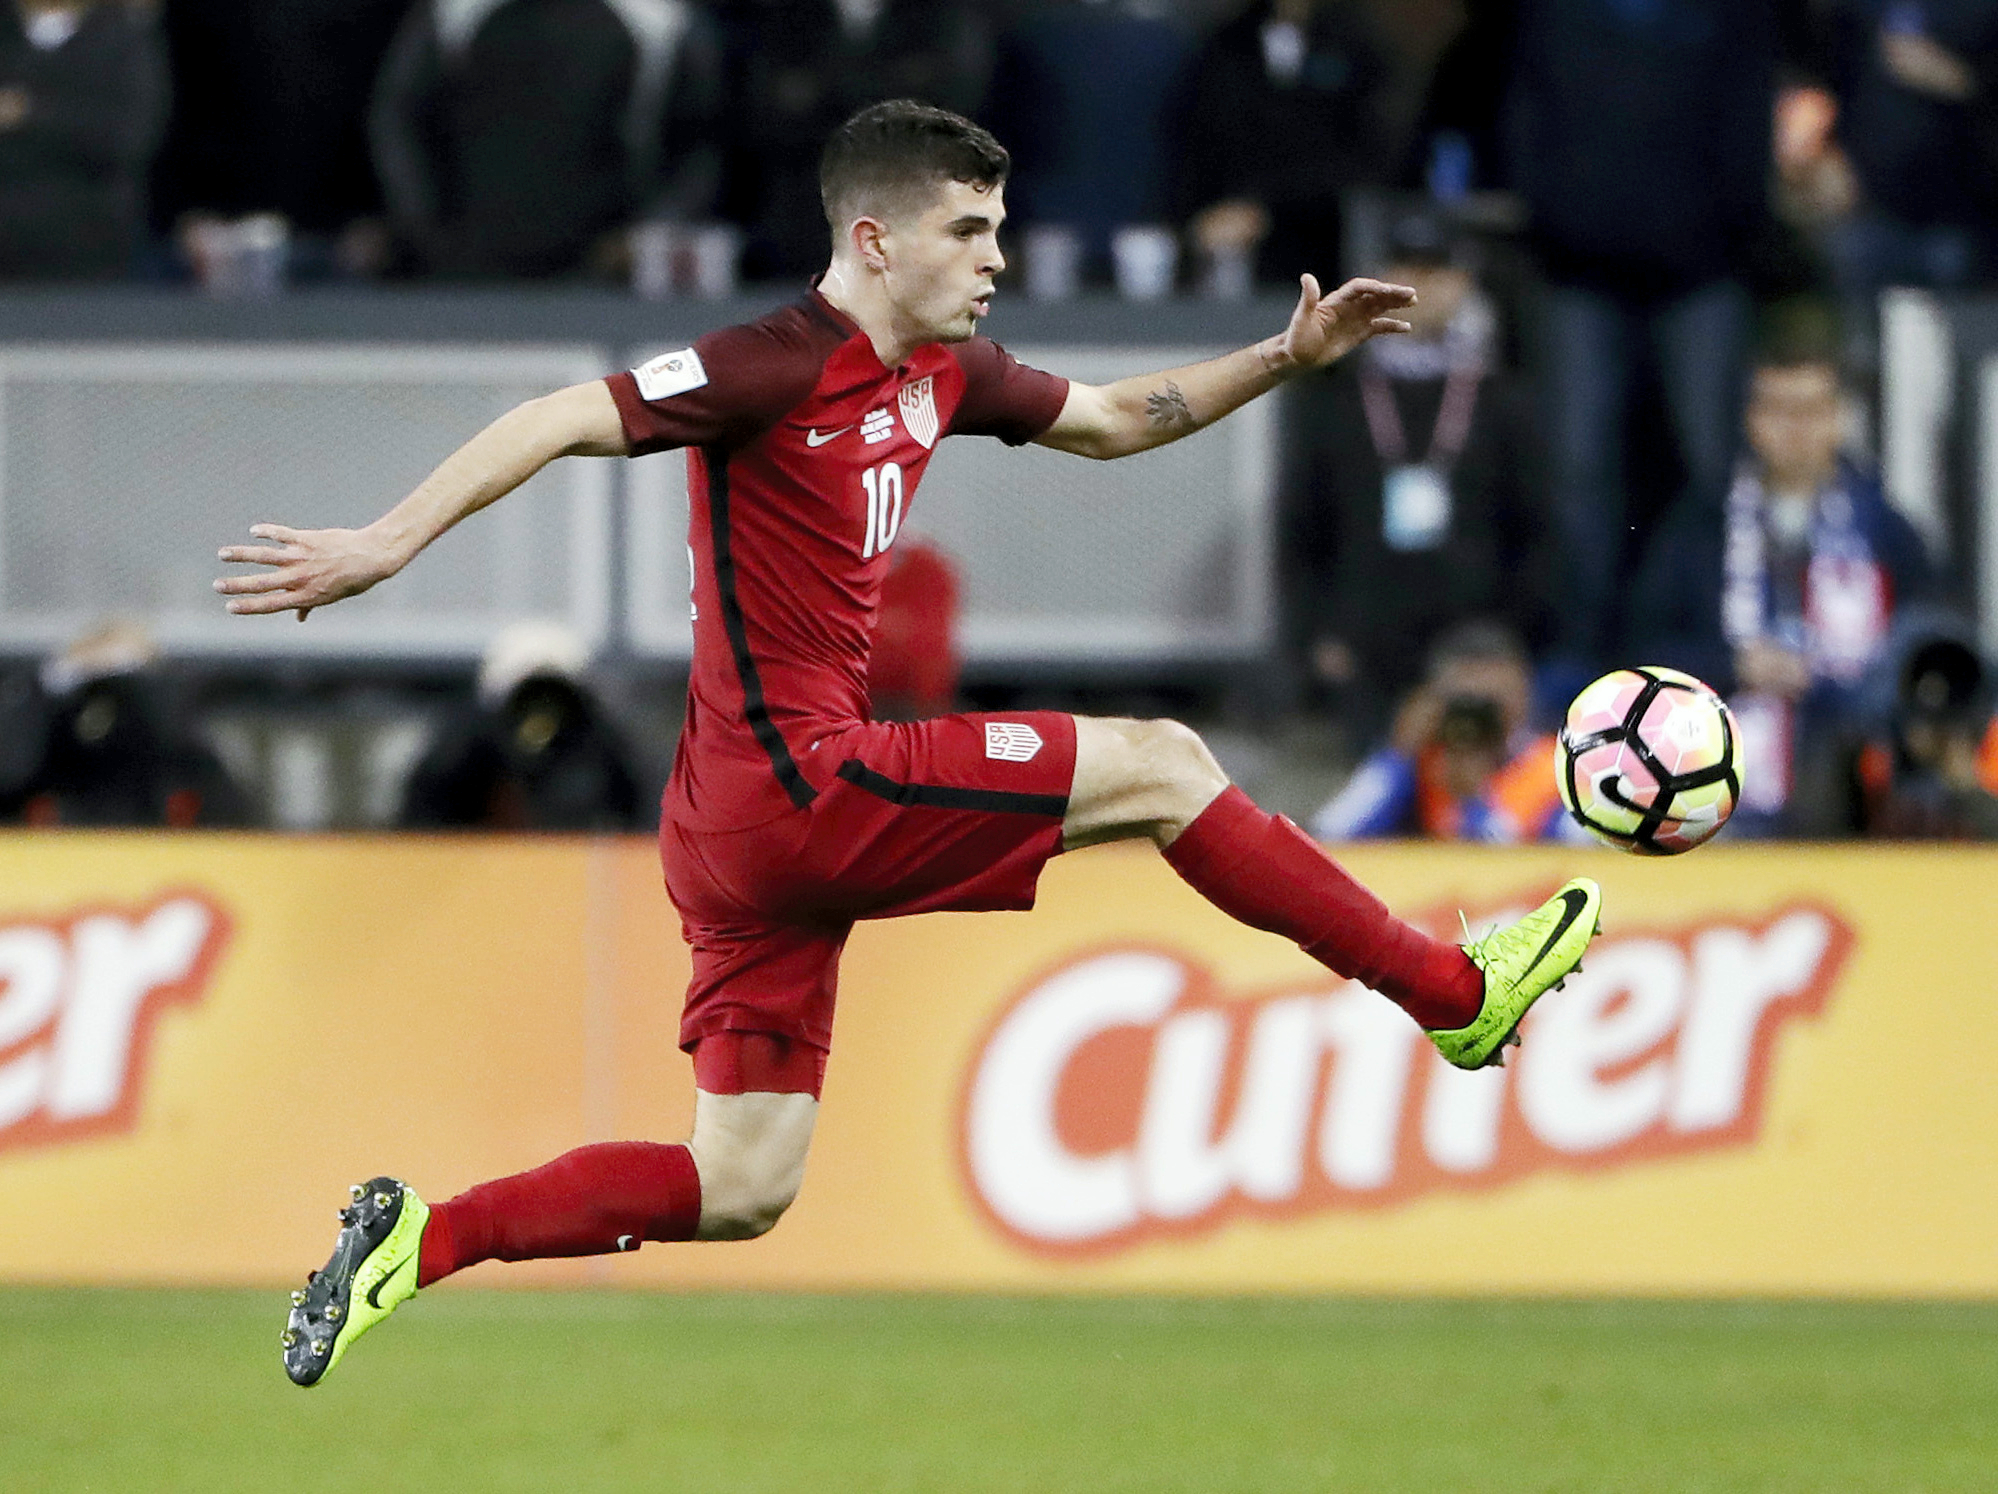 Christian Pulisic becomes heartbeat of US men's soccer team at age 18